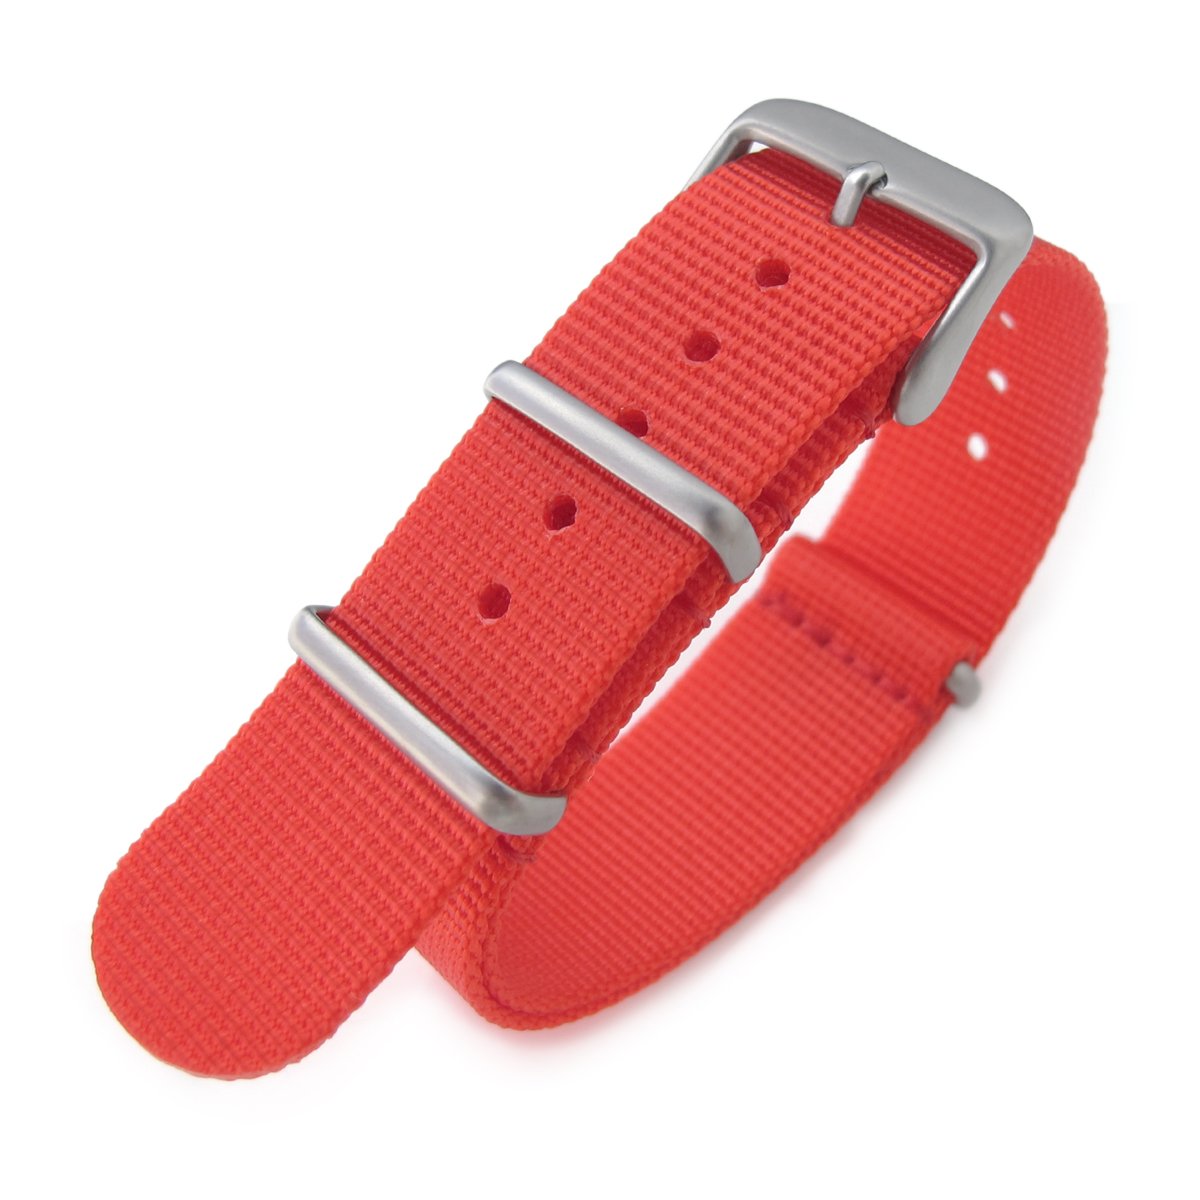 NATO 20mm G10 Military Watch Band Nylon Strap Red Sandblasted 260mm Strapcode Watch Bands